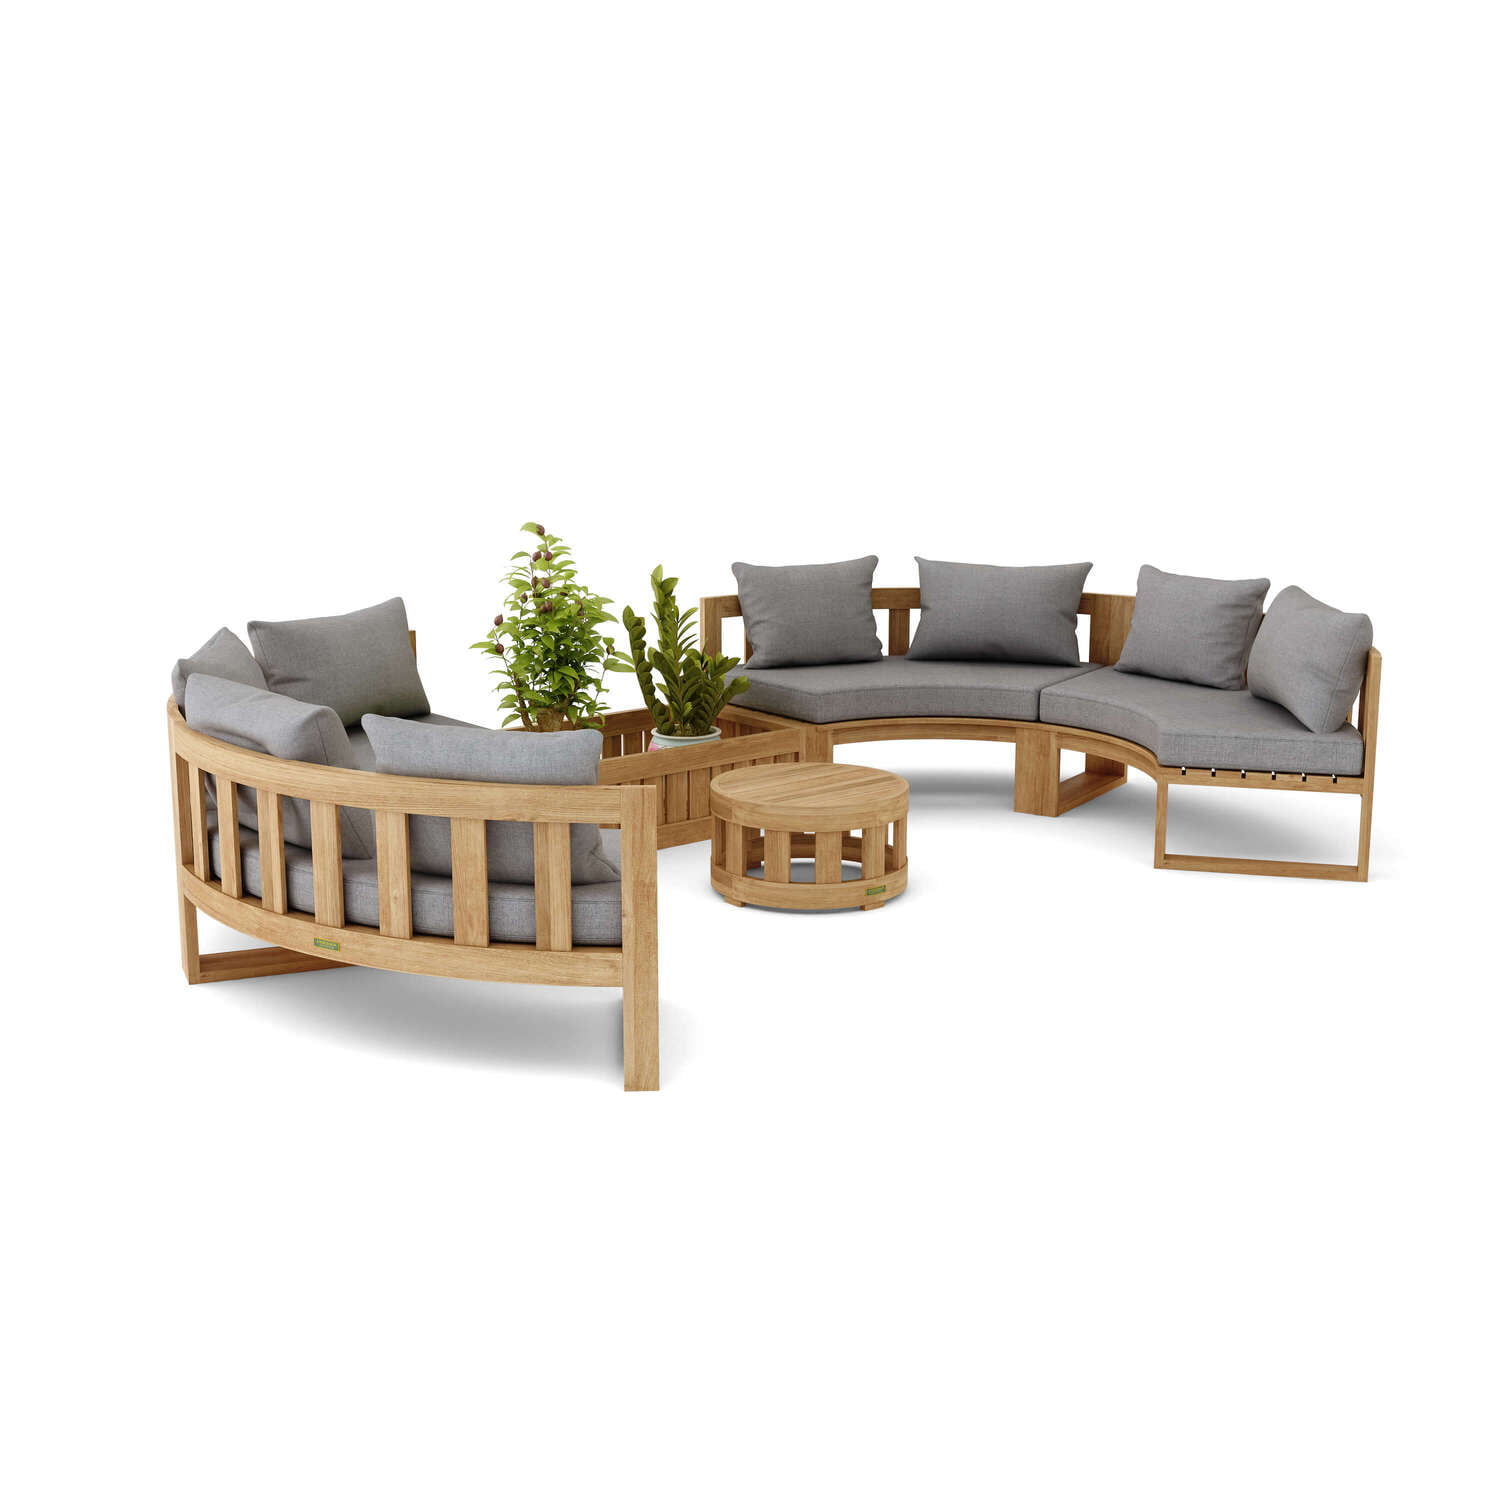 Picture of Anderson Teak SET-809 Circular Modular Deep Seating Set, Natural Smooth Well Sanded